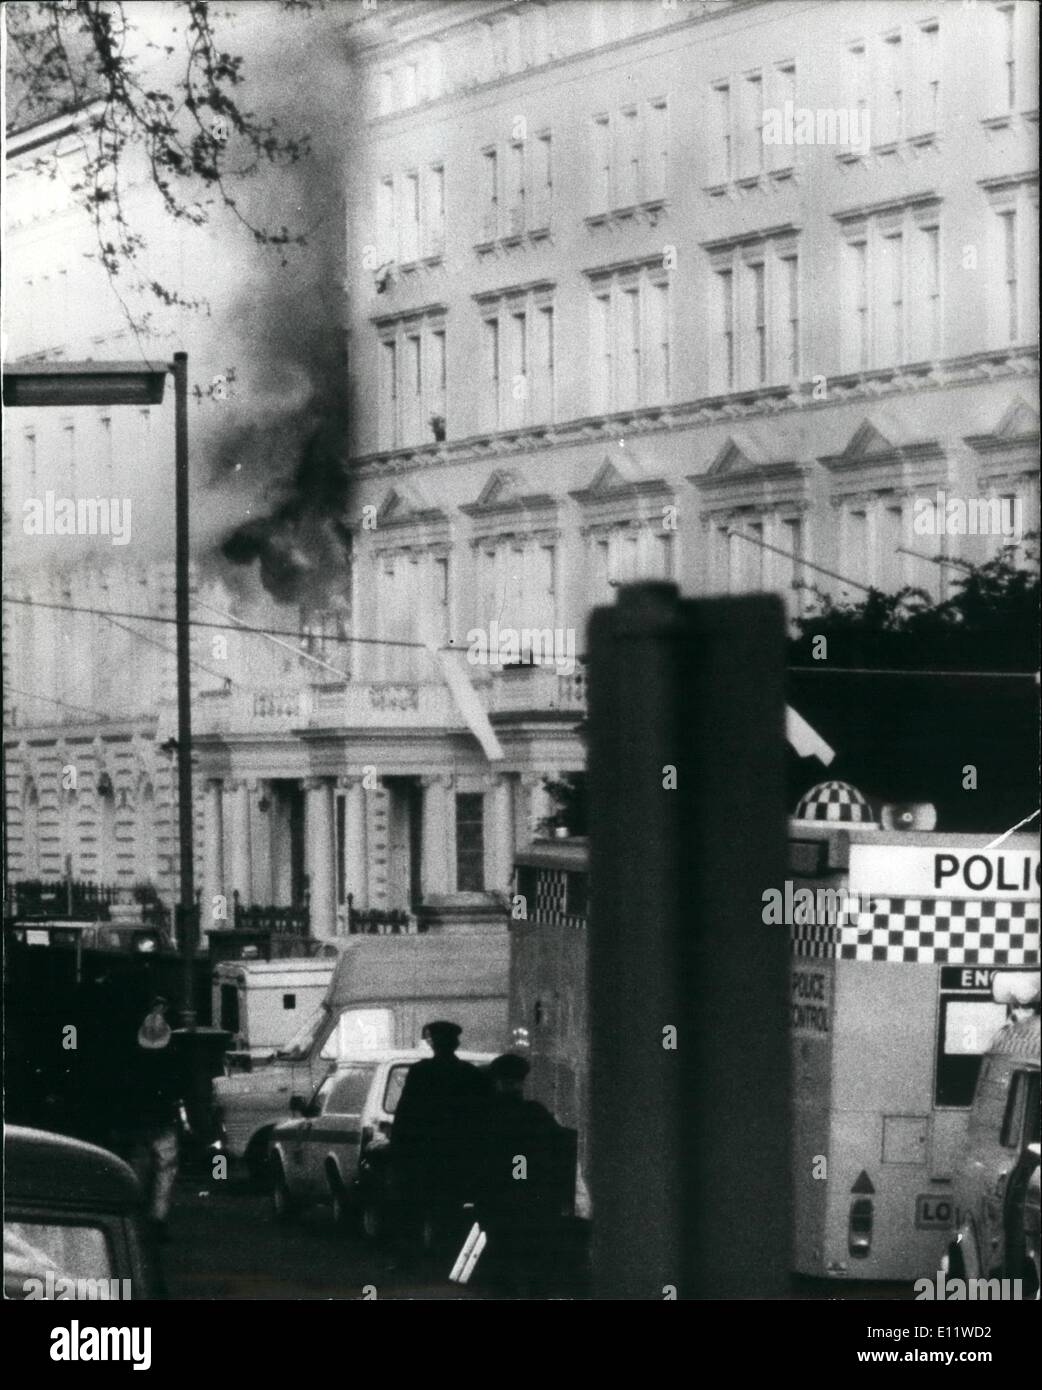 May 05, 1980 - SAS Squad storm Iranian Embassy and Free all the hostages: The six days siege of the Iranian Embassy in London's Stock Photo